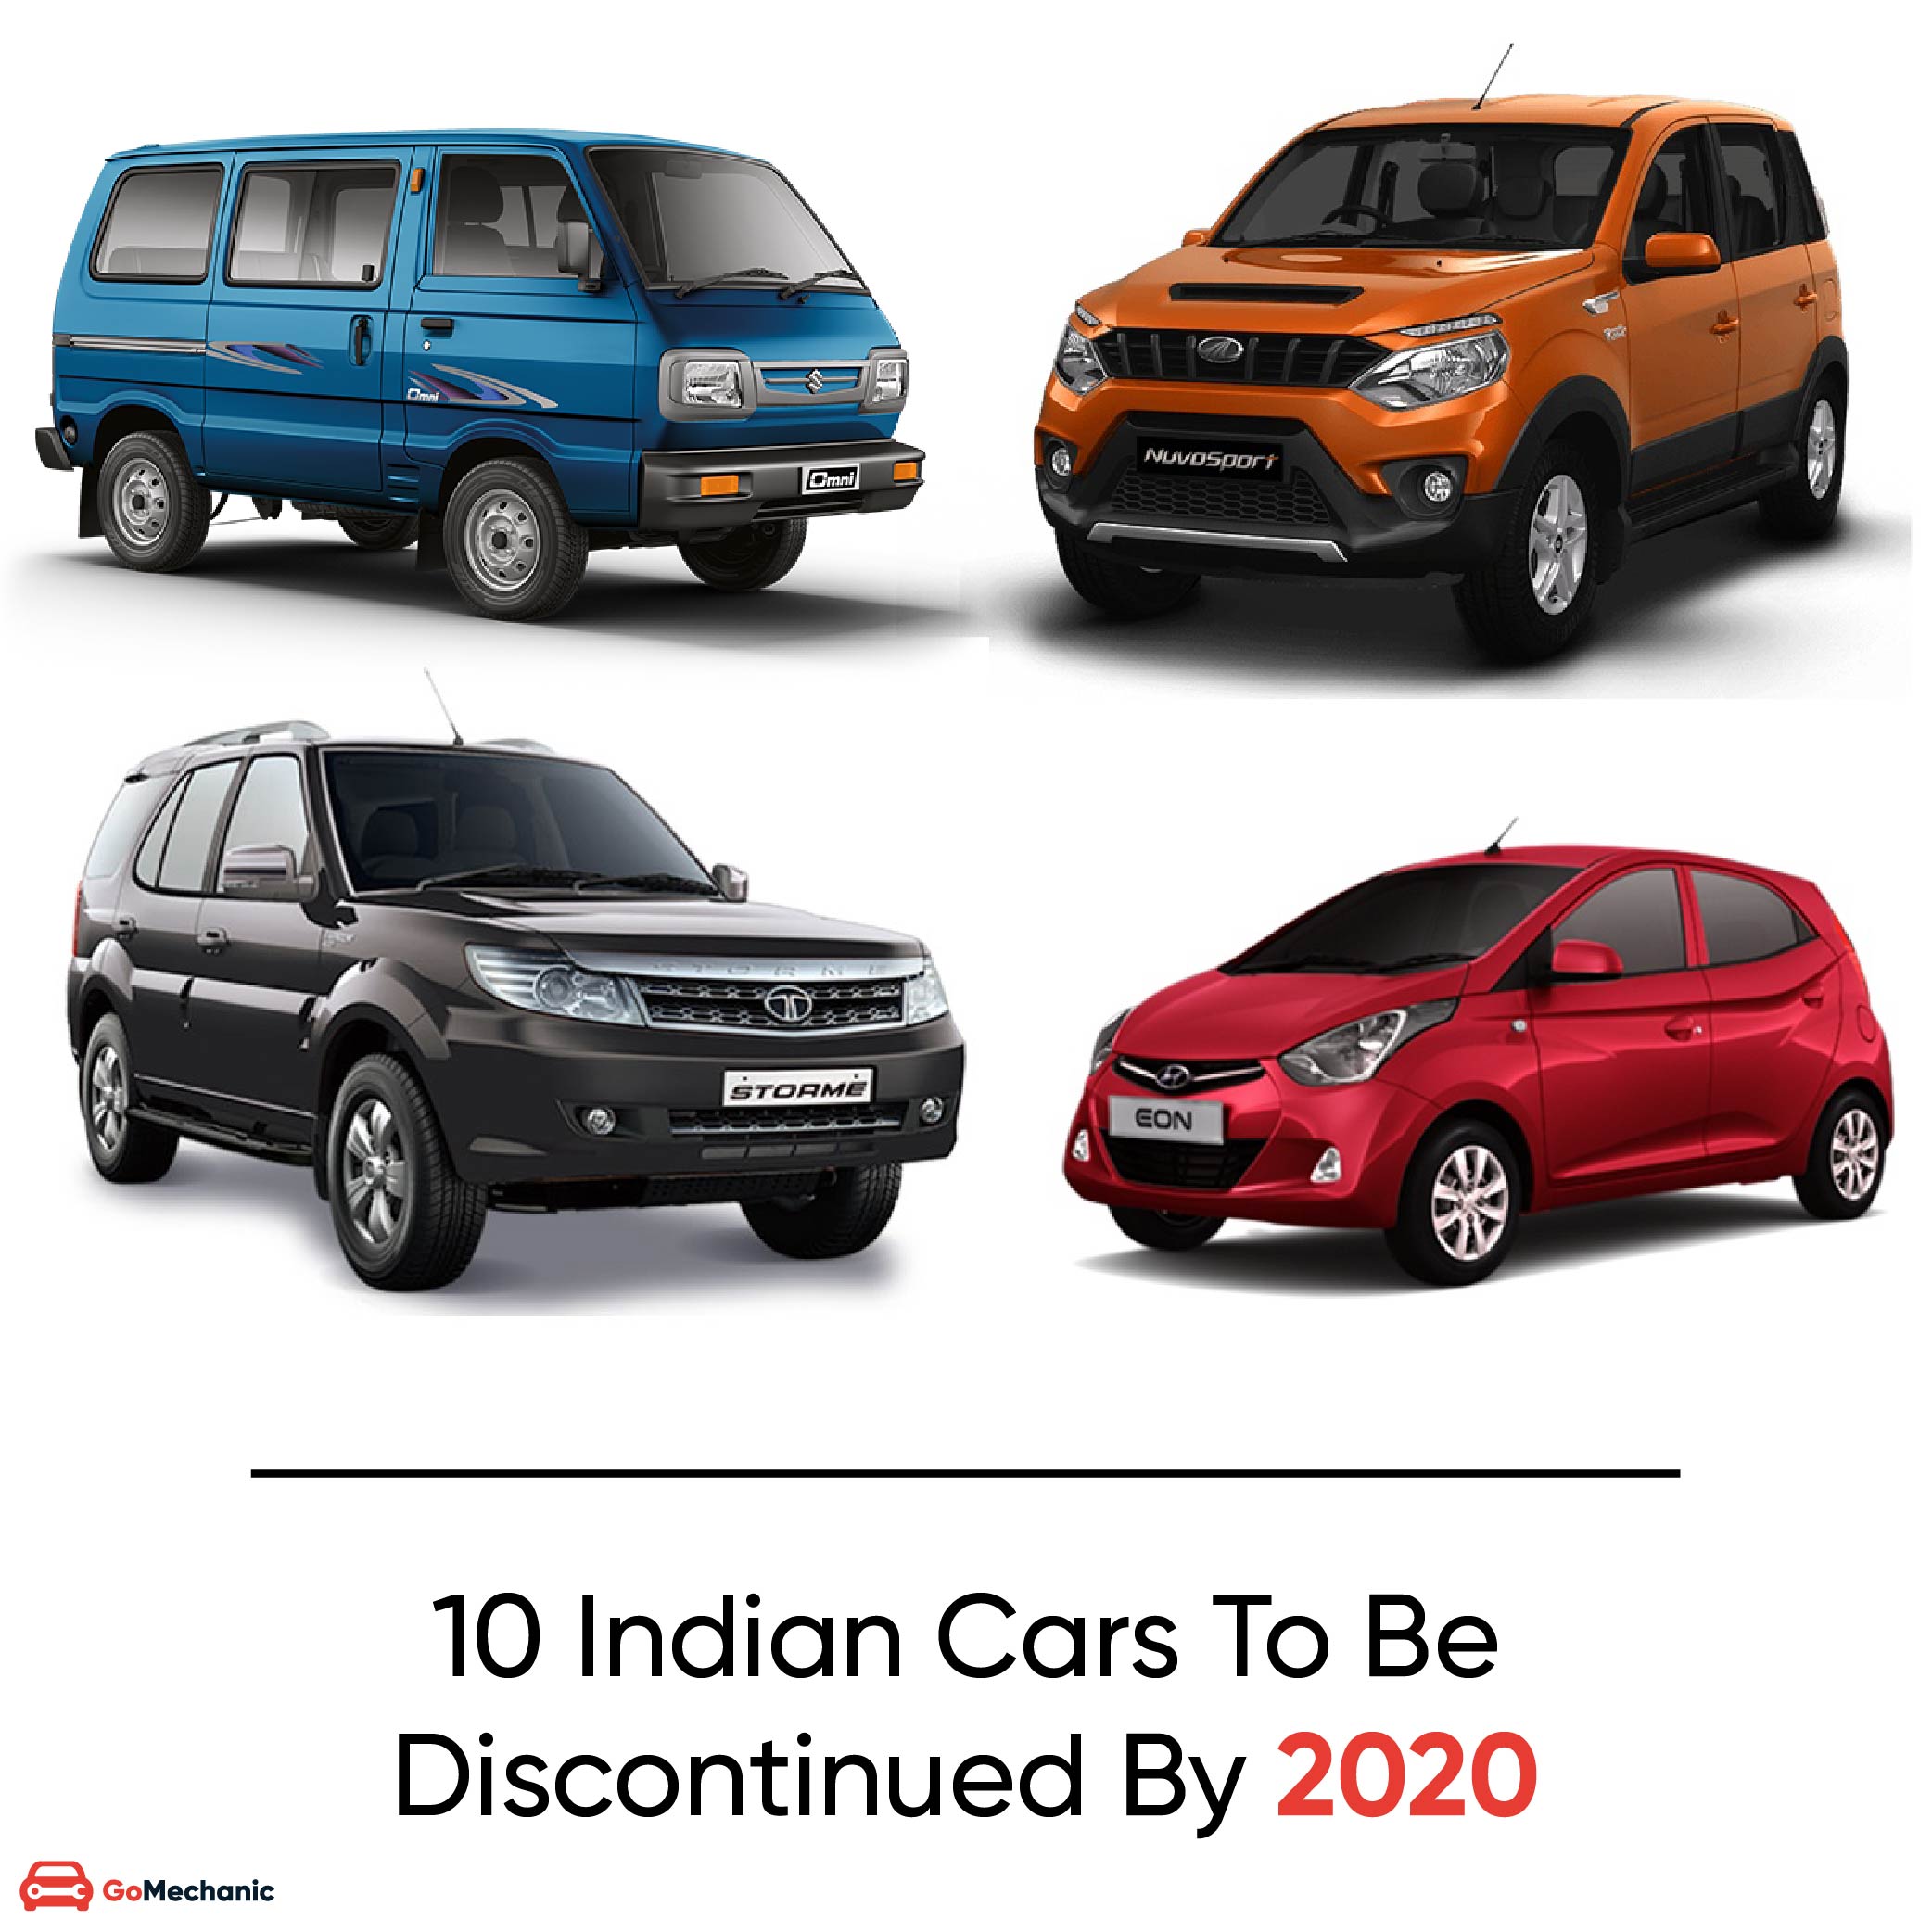 10 Indian Cars To Be Discontinued By 2020